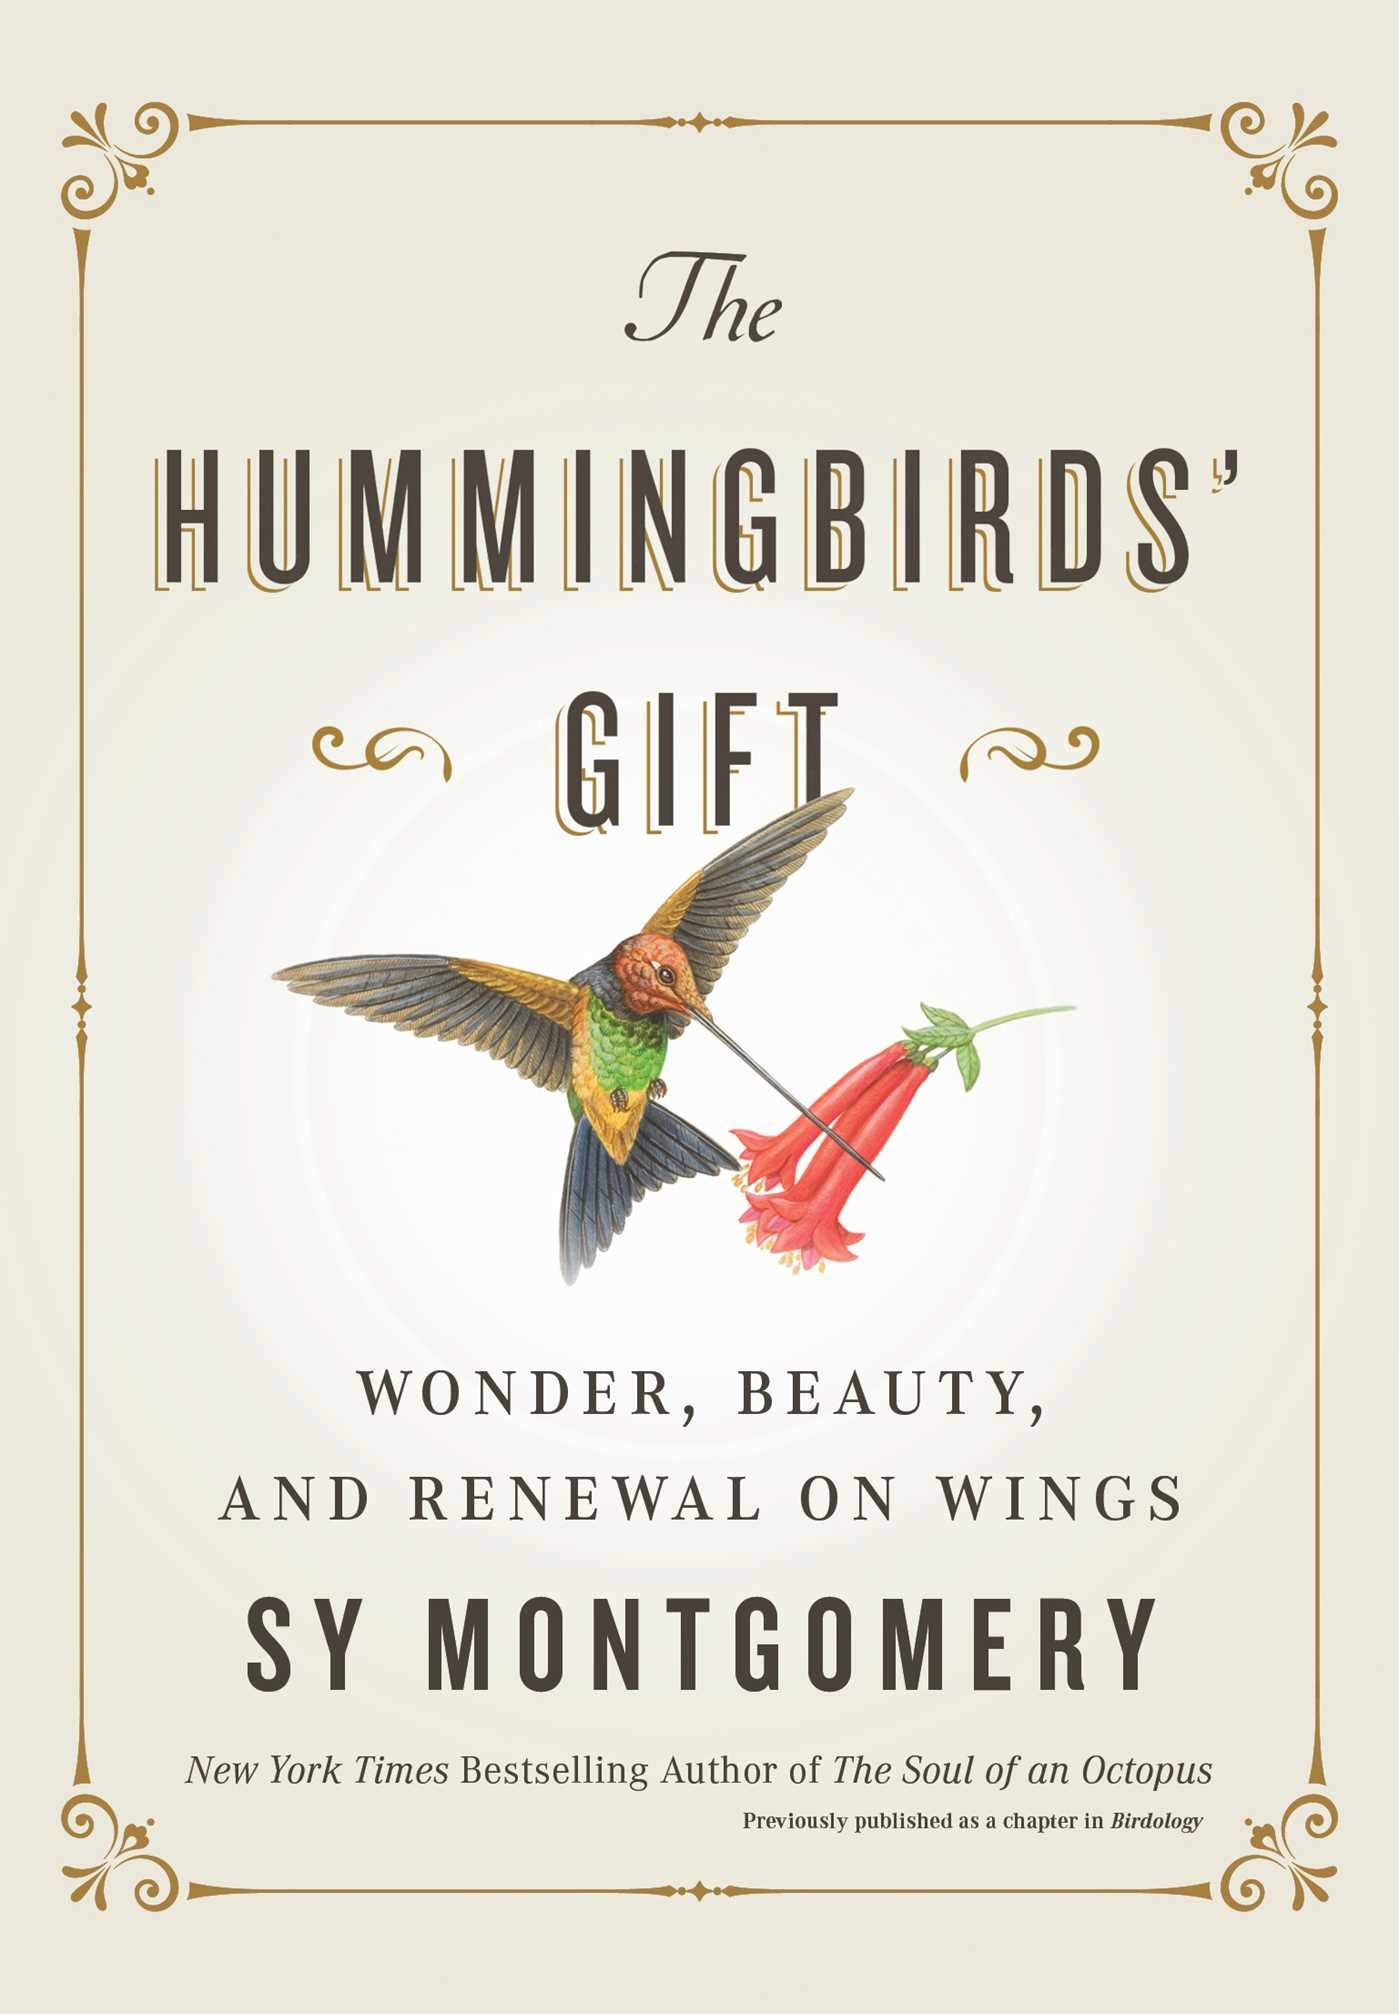 The Hummingbird's Gifts is a perfect gift for your bird lover friends. Create a hummingbird gift box with a variety of items.